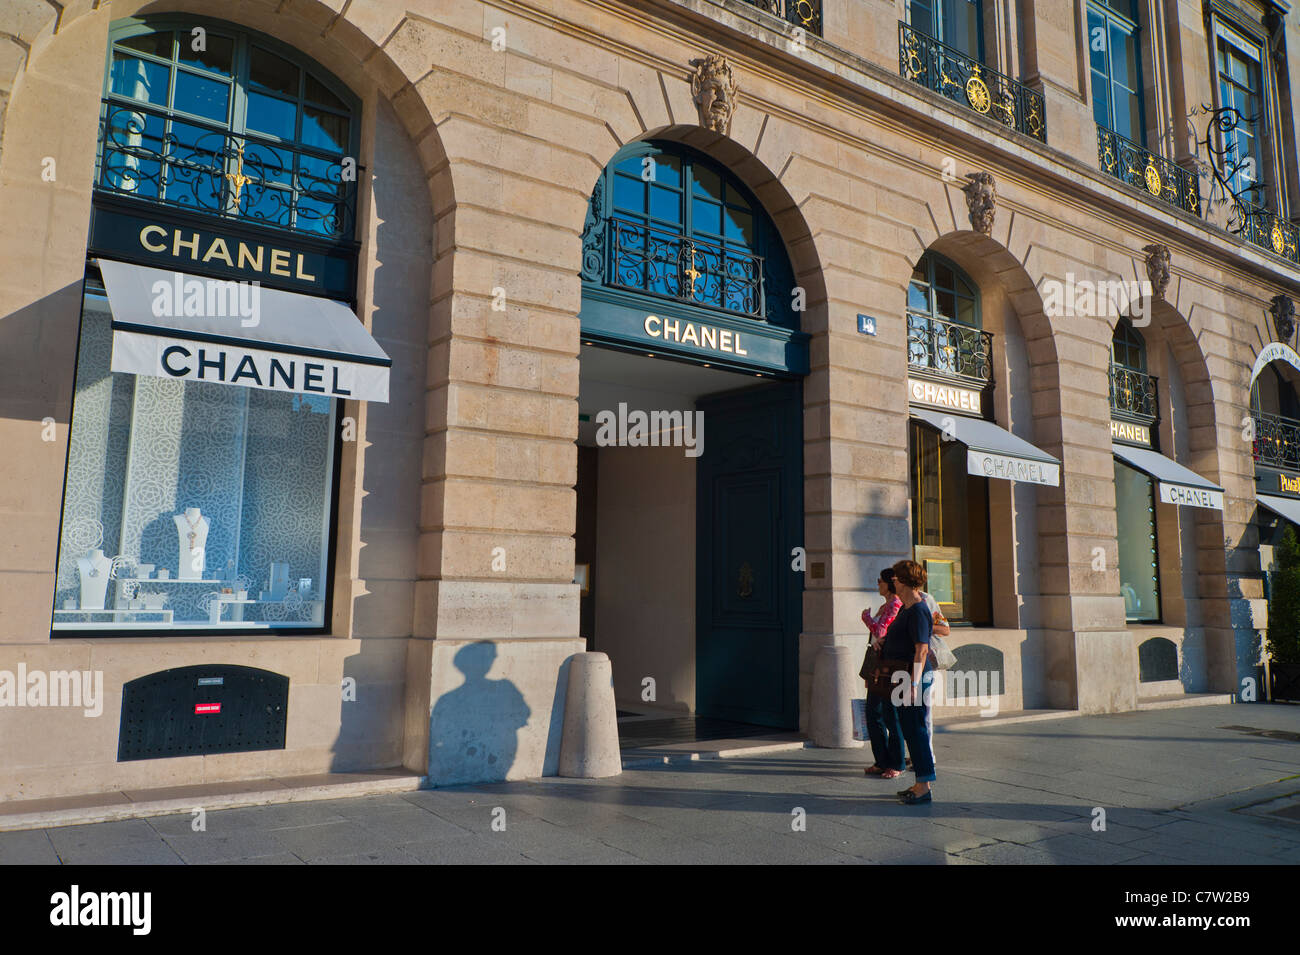 Paris, France, Women Walking, Shopping on High Street, Place Vendome,  Chanel Store Front haute couture Jewelry Shops, mode labels Stock Photo -  Alamy